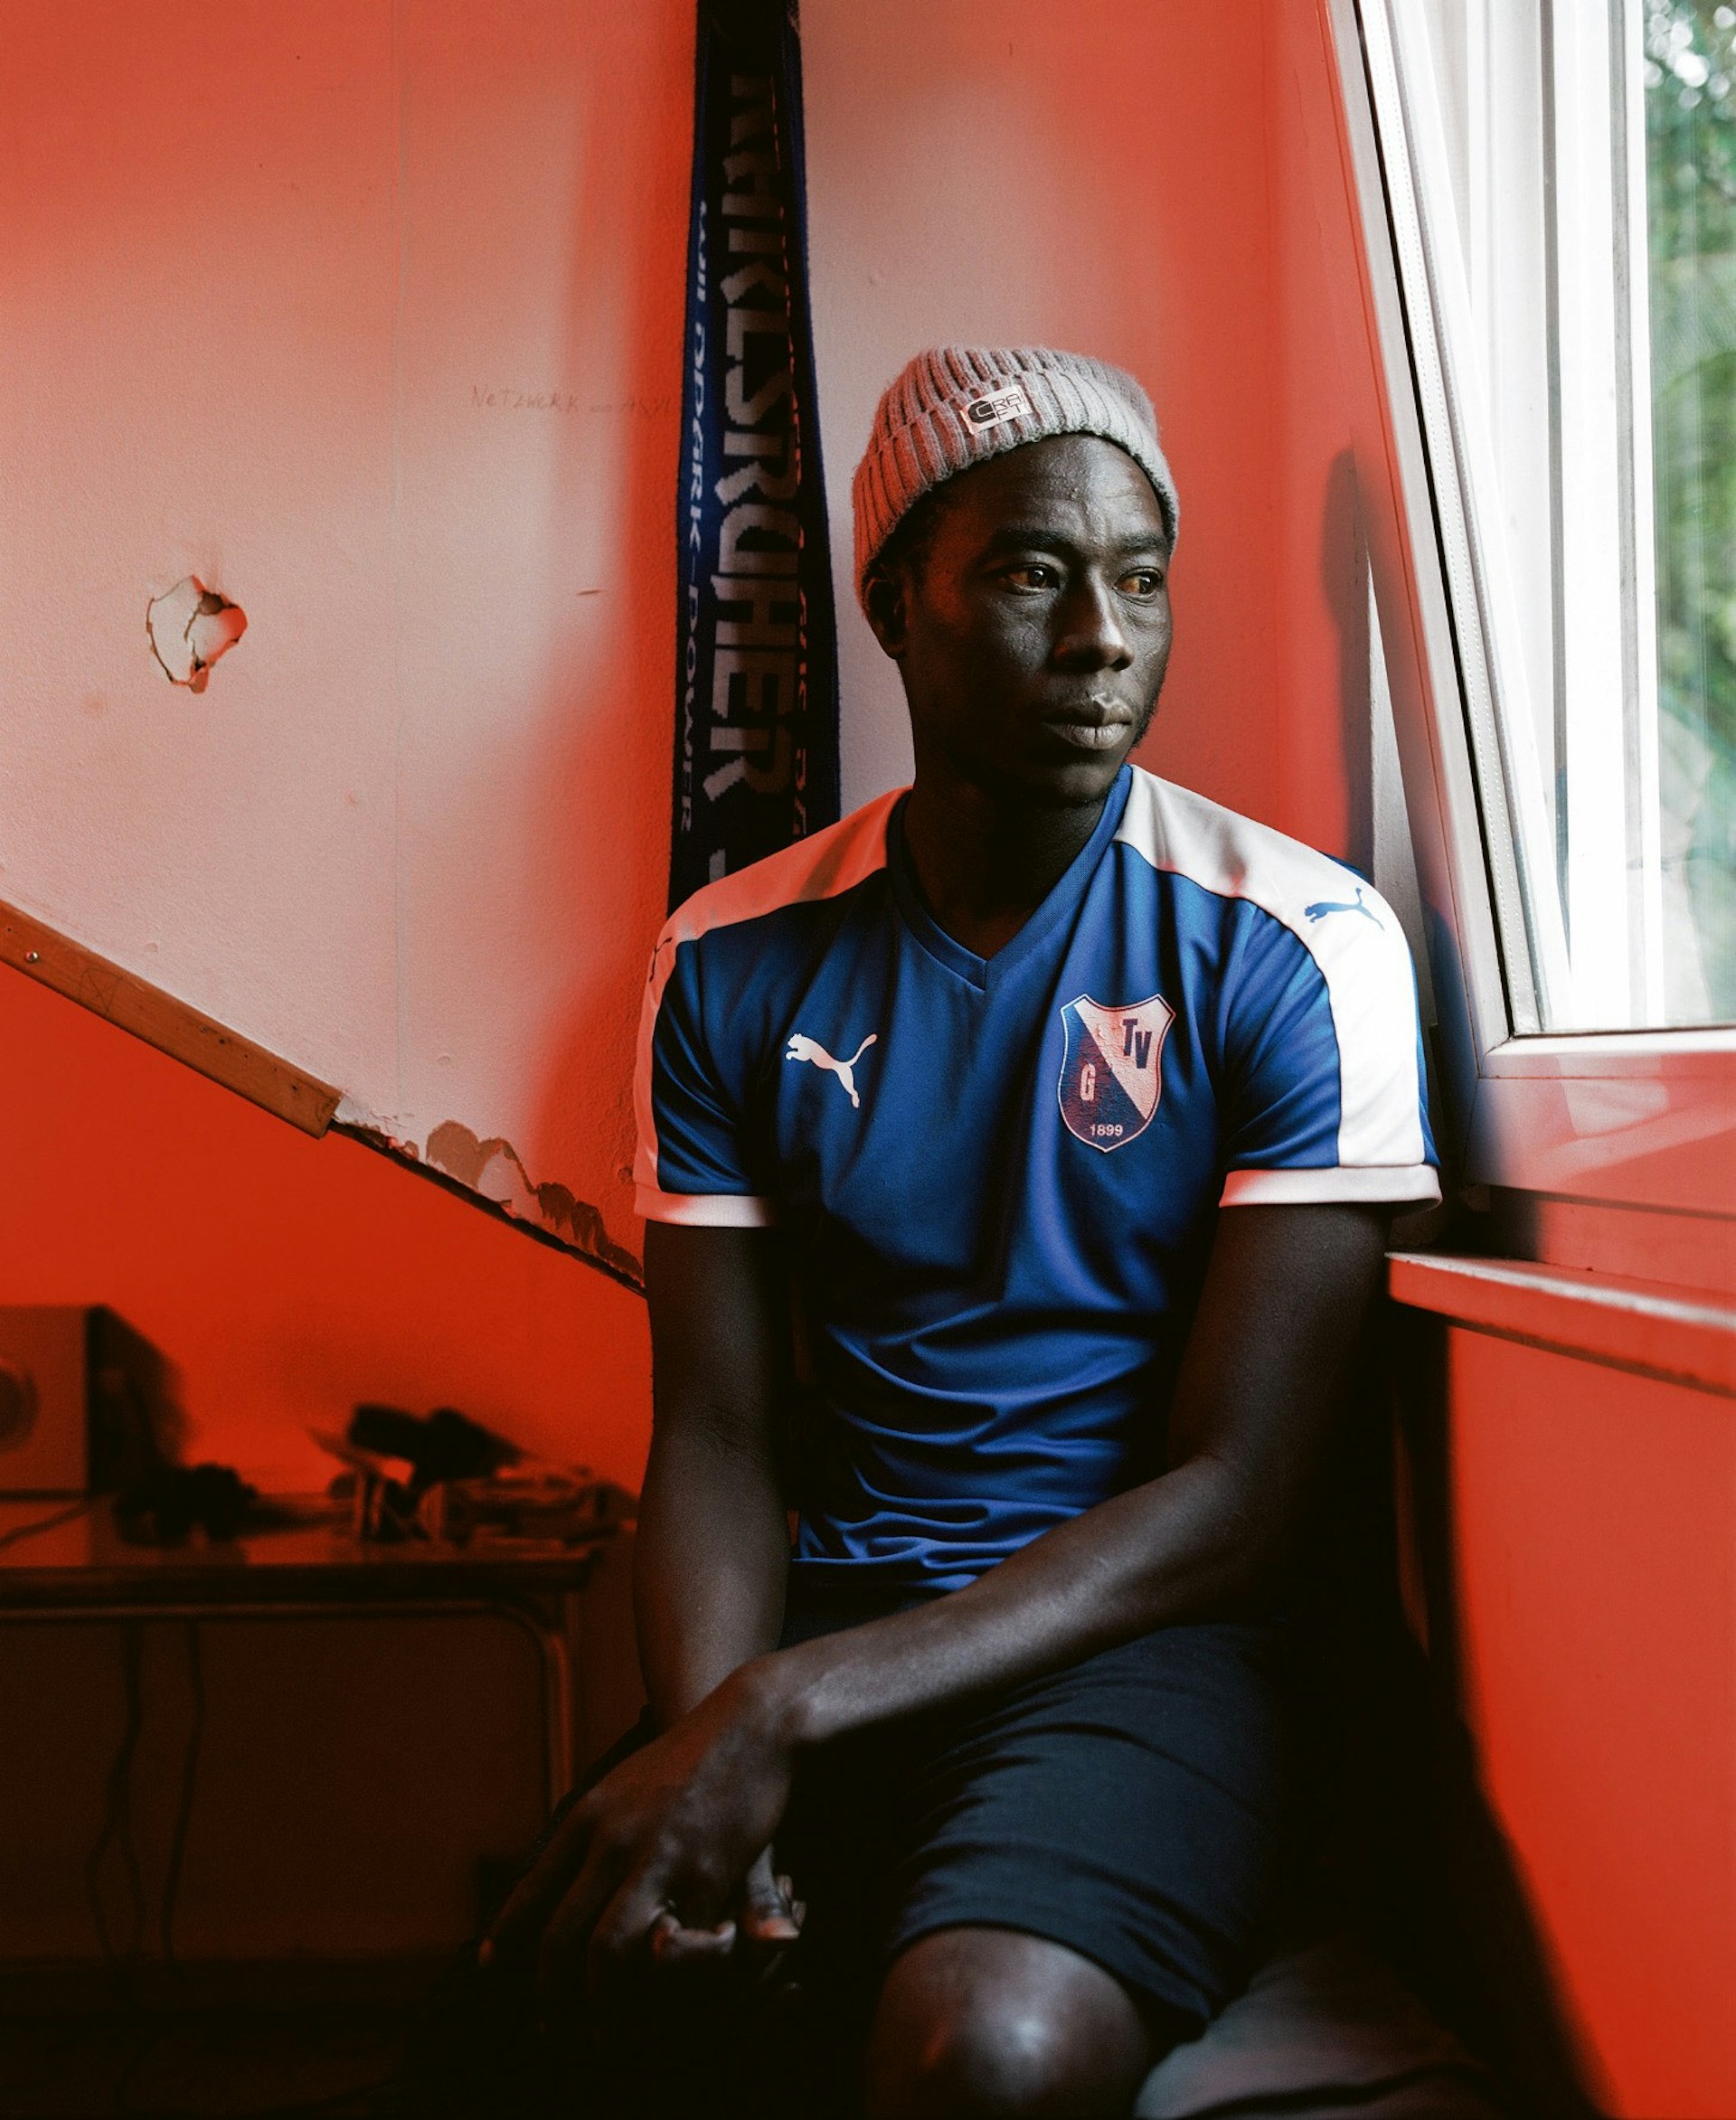 © Sibylle Fendt Mohammed Swaleh, October 2018 Mohammed dreams of a career as a footballer. Currently, he is playing on the 1st men’s team of TV Gräfenhausen refugee